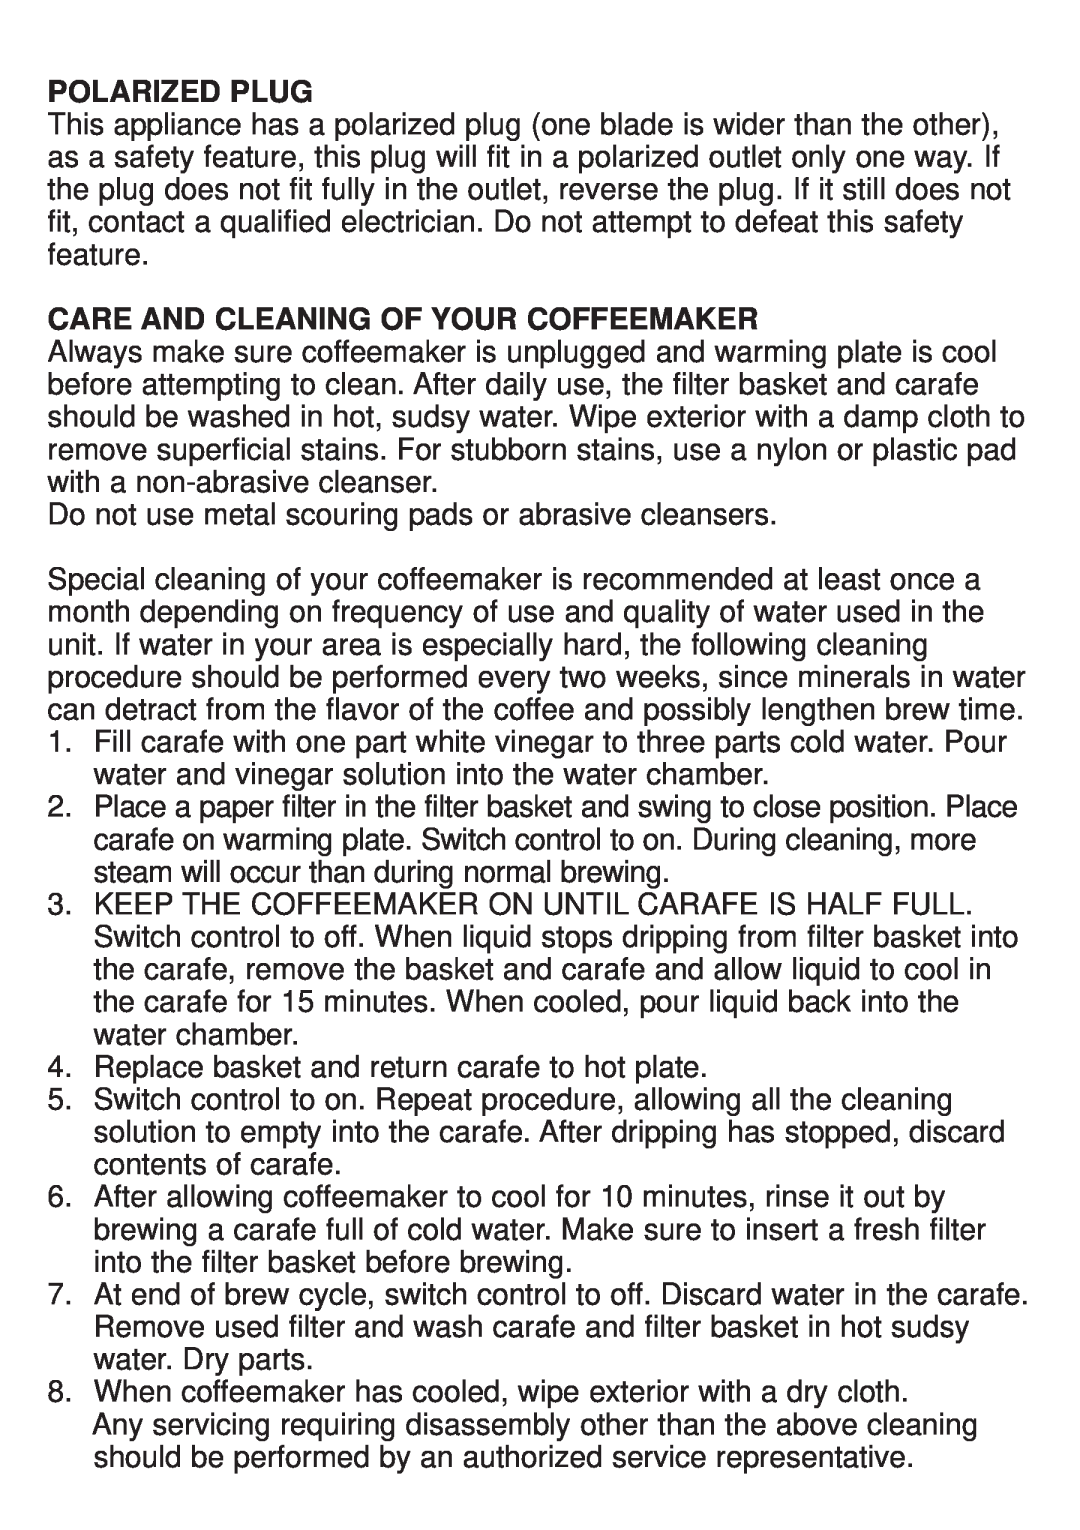 Continental Electric CE23609 operating instructions Polarized Plug, Care And Cleaning Of Your Coffeemaker 